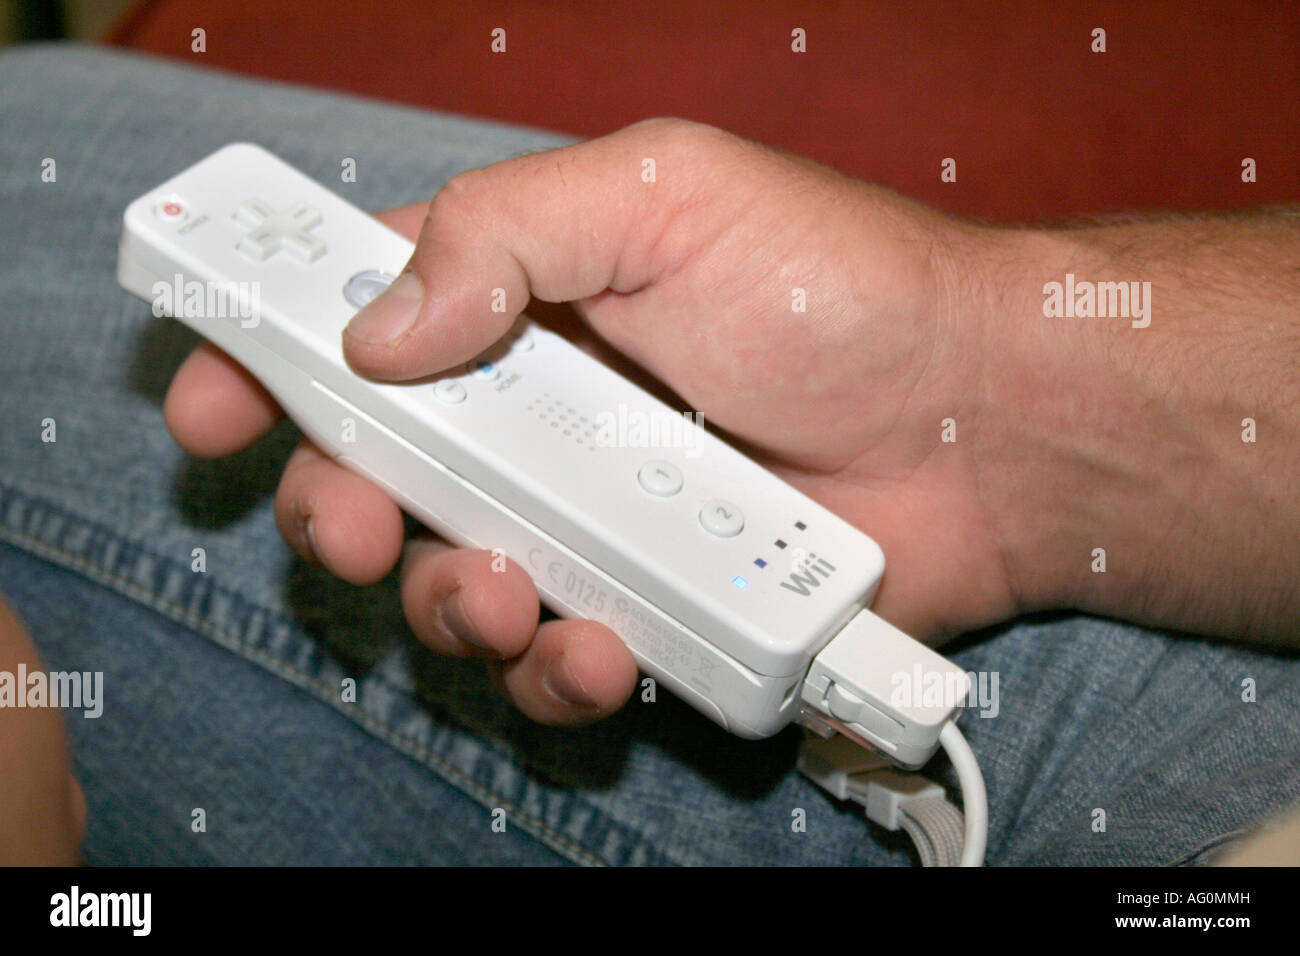 male hands holding Nintendo Wii remote control Stock Photo